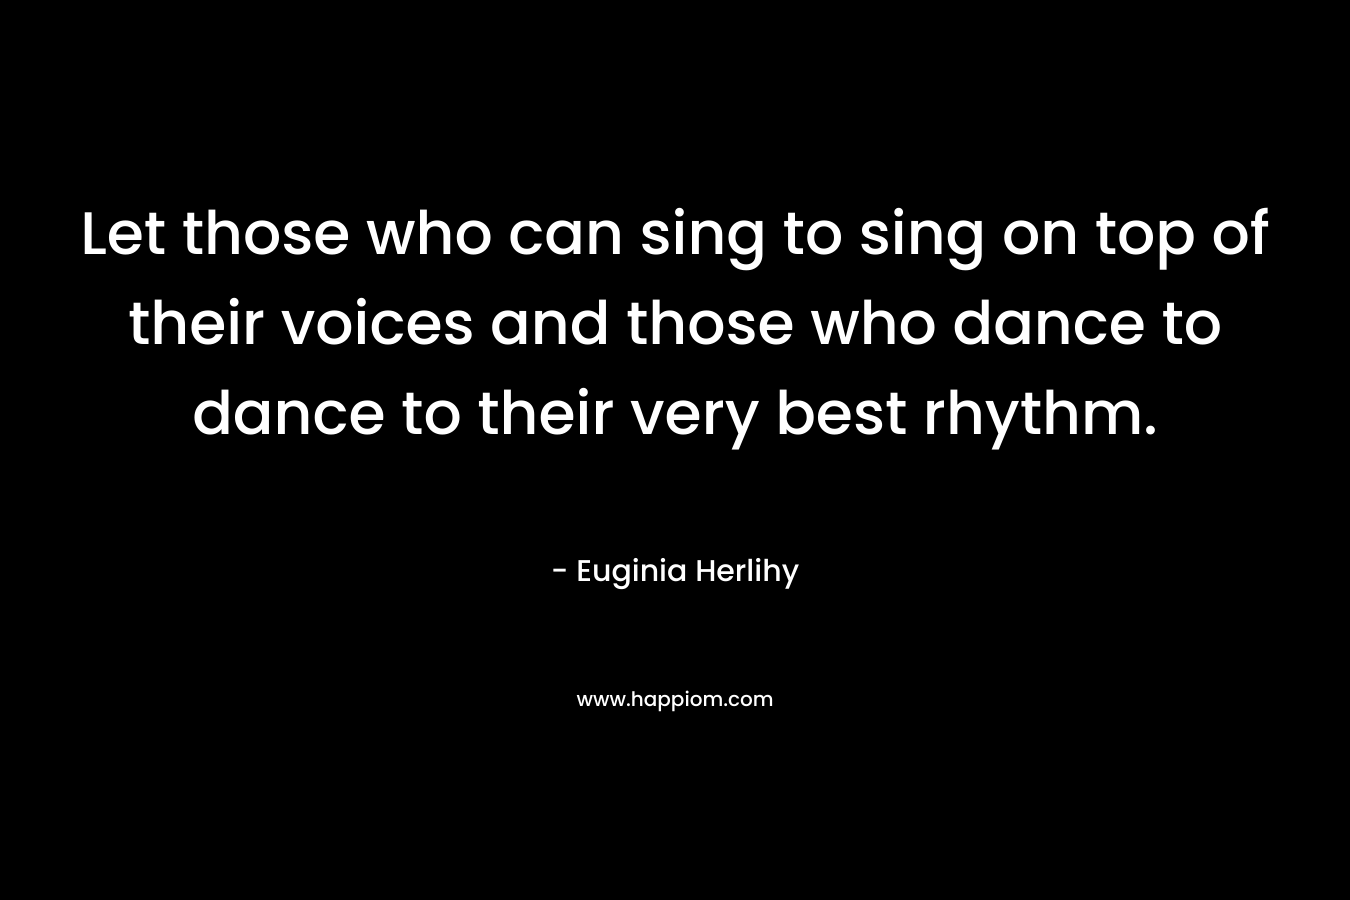 Let those who can sing to sing on top of their voices and those who dance to dance to their very best rhythm.